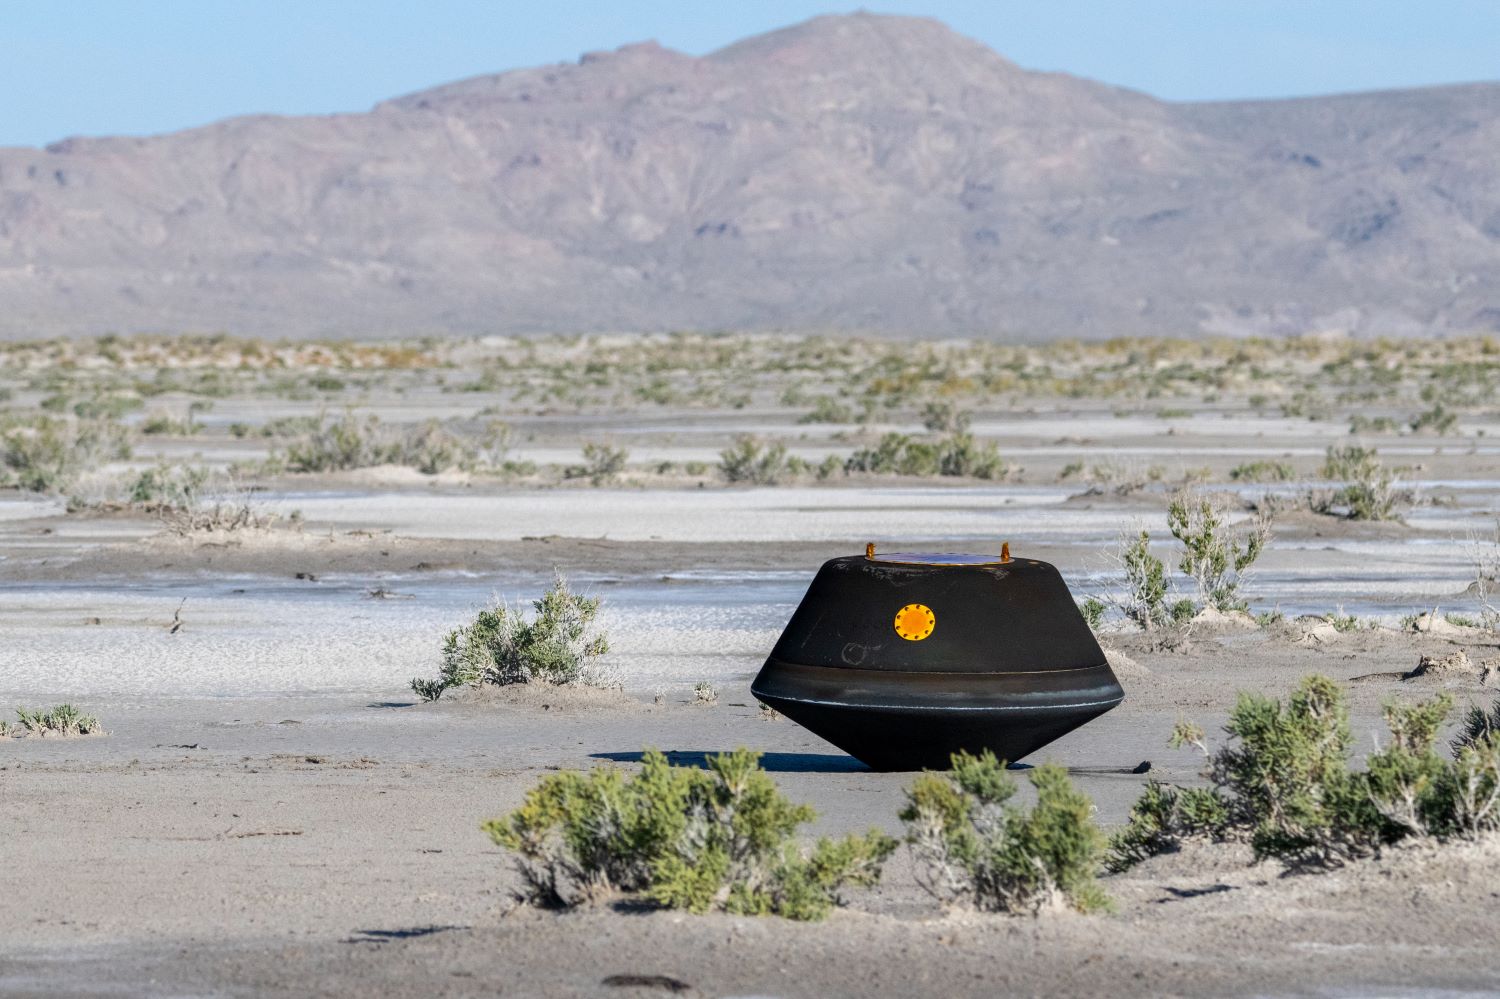 The sample return capsule from NASA’s OSIRIS-REx mission is seen shortly after touching down in the desert.